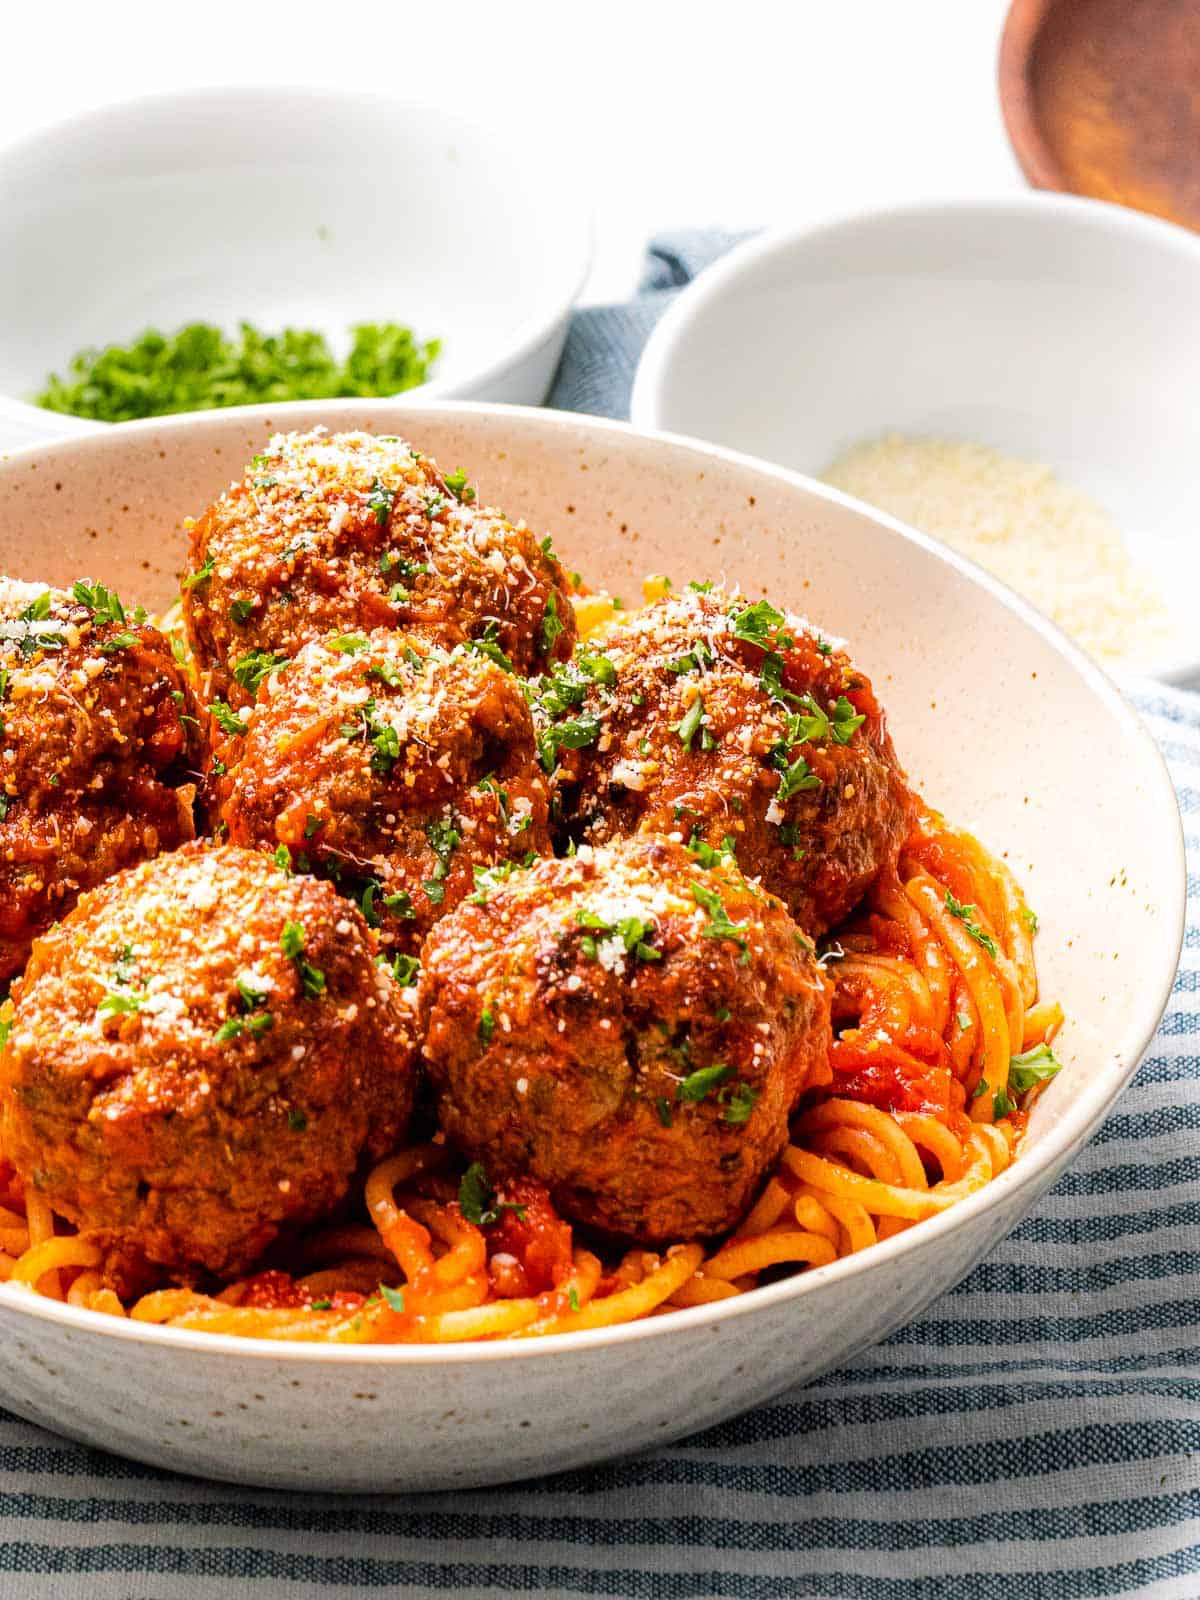 Tender and juicy Italian meatballs with a bowl of pasta.